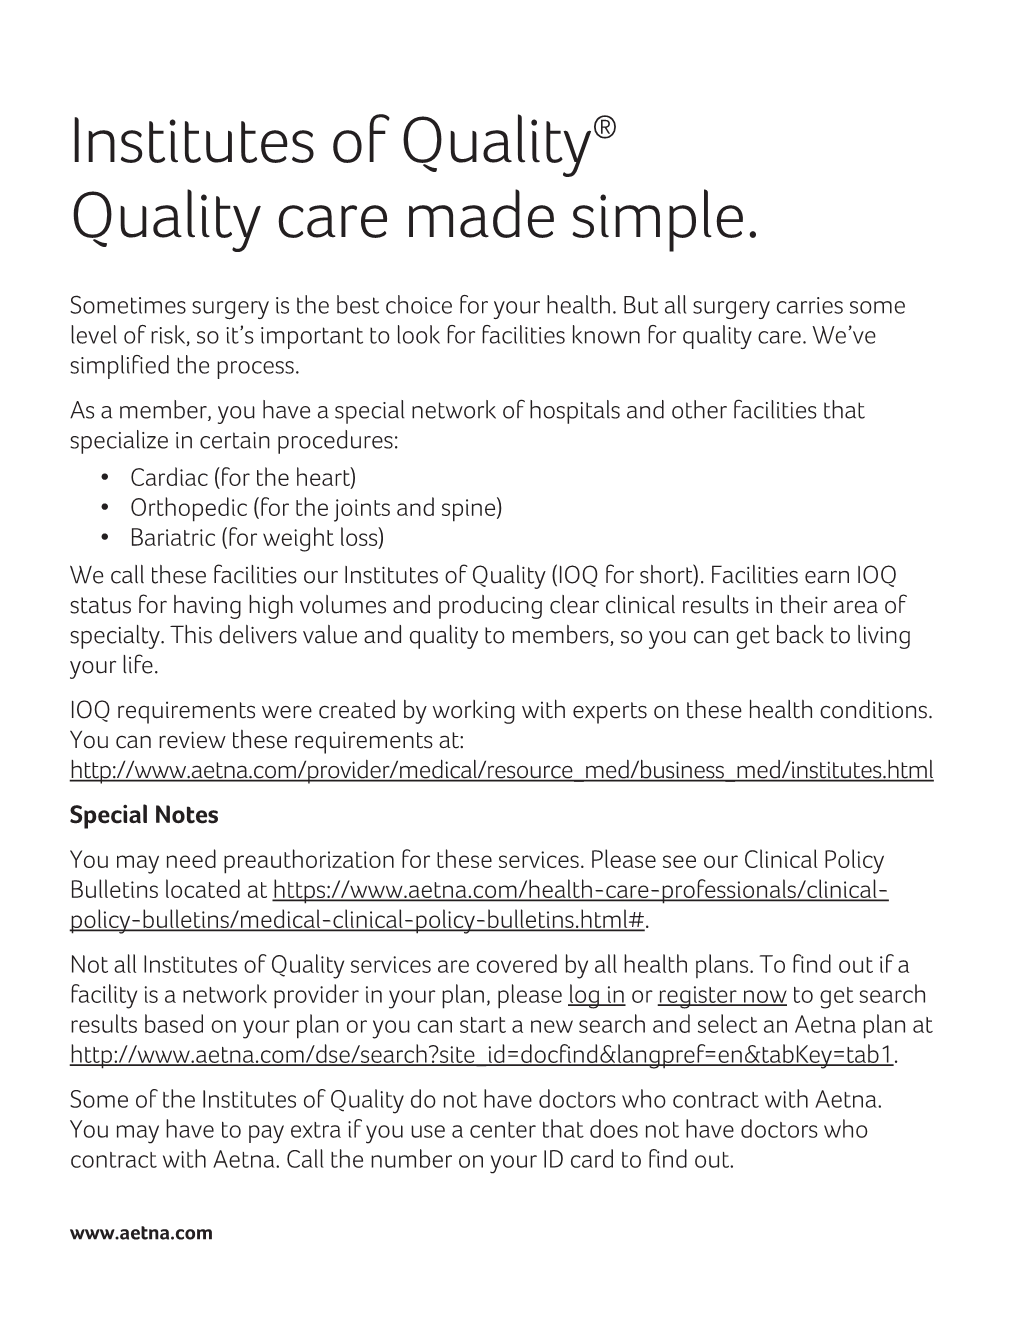 Institutes of Quality® Quality Care Made Simple